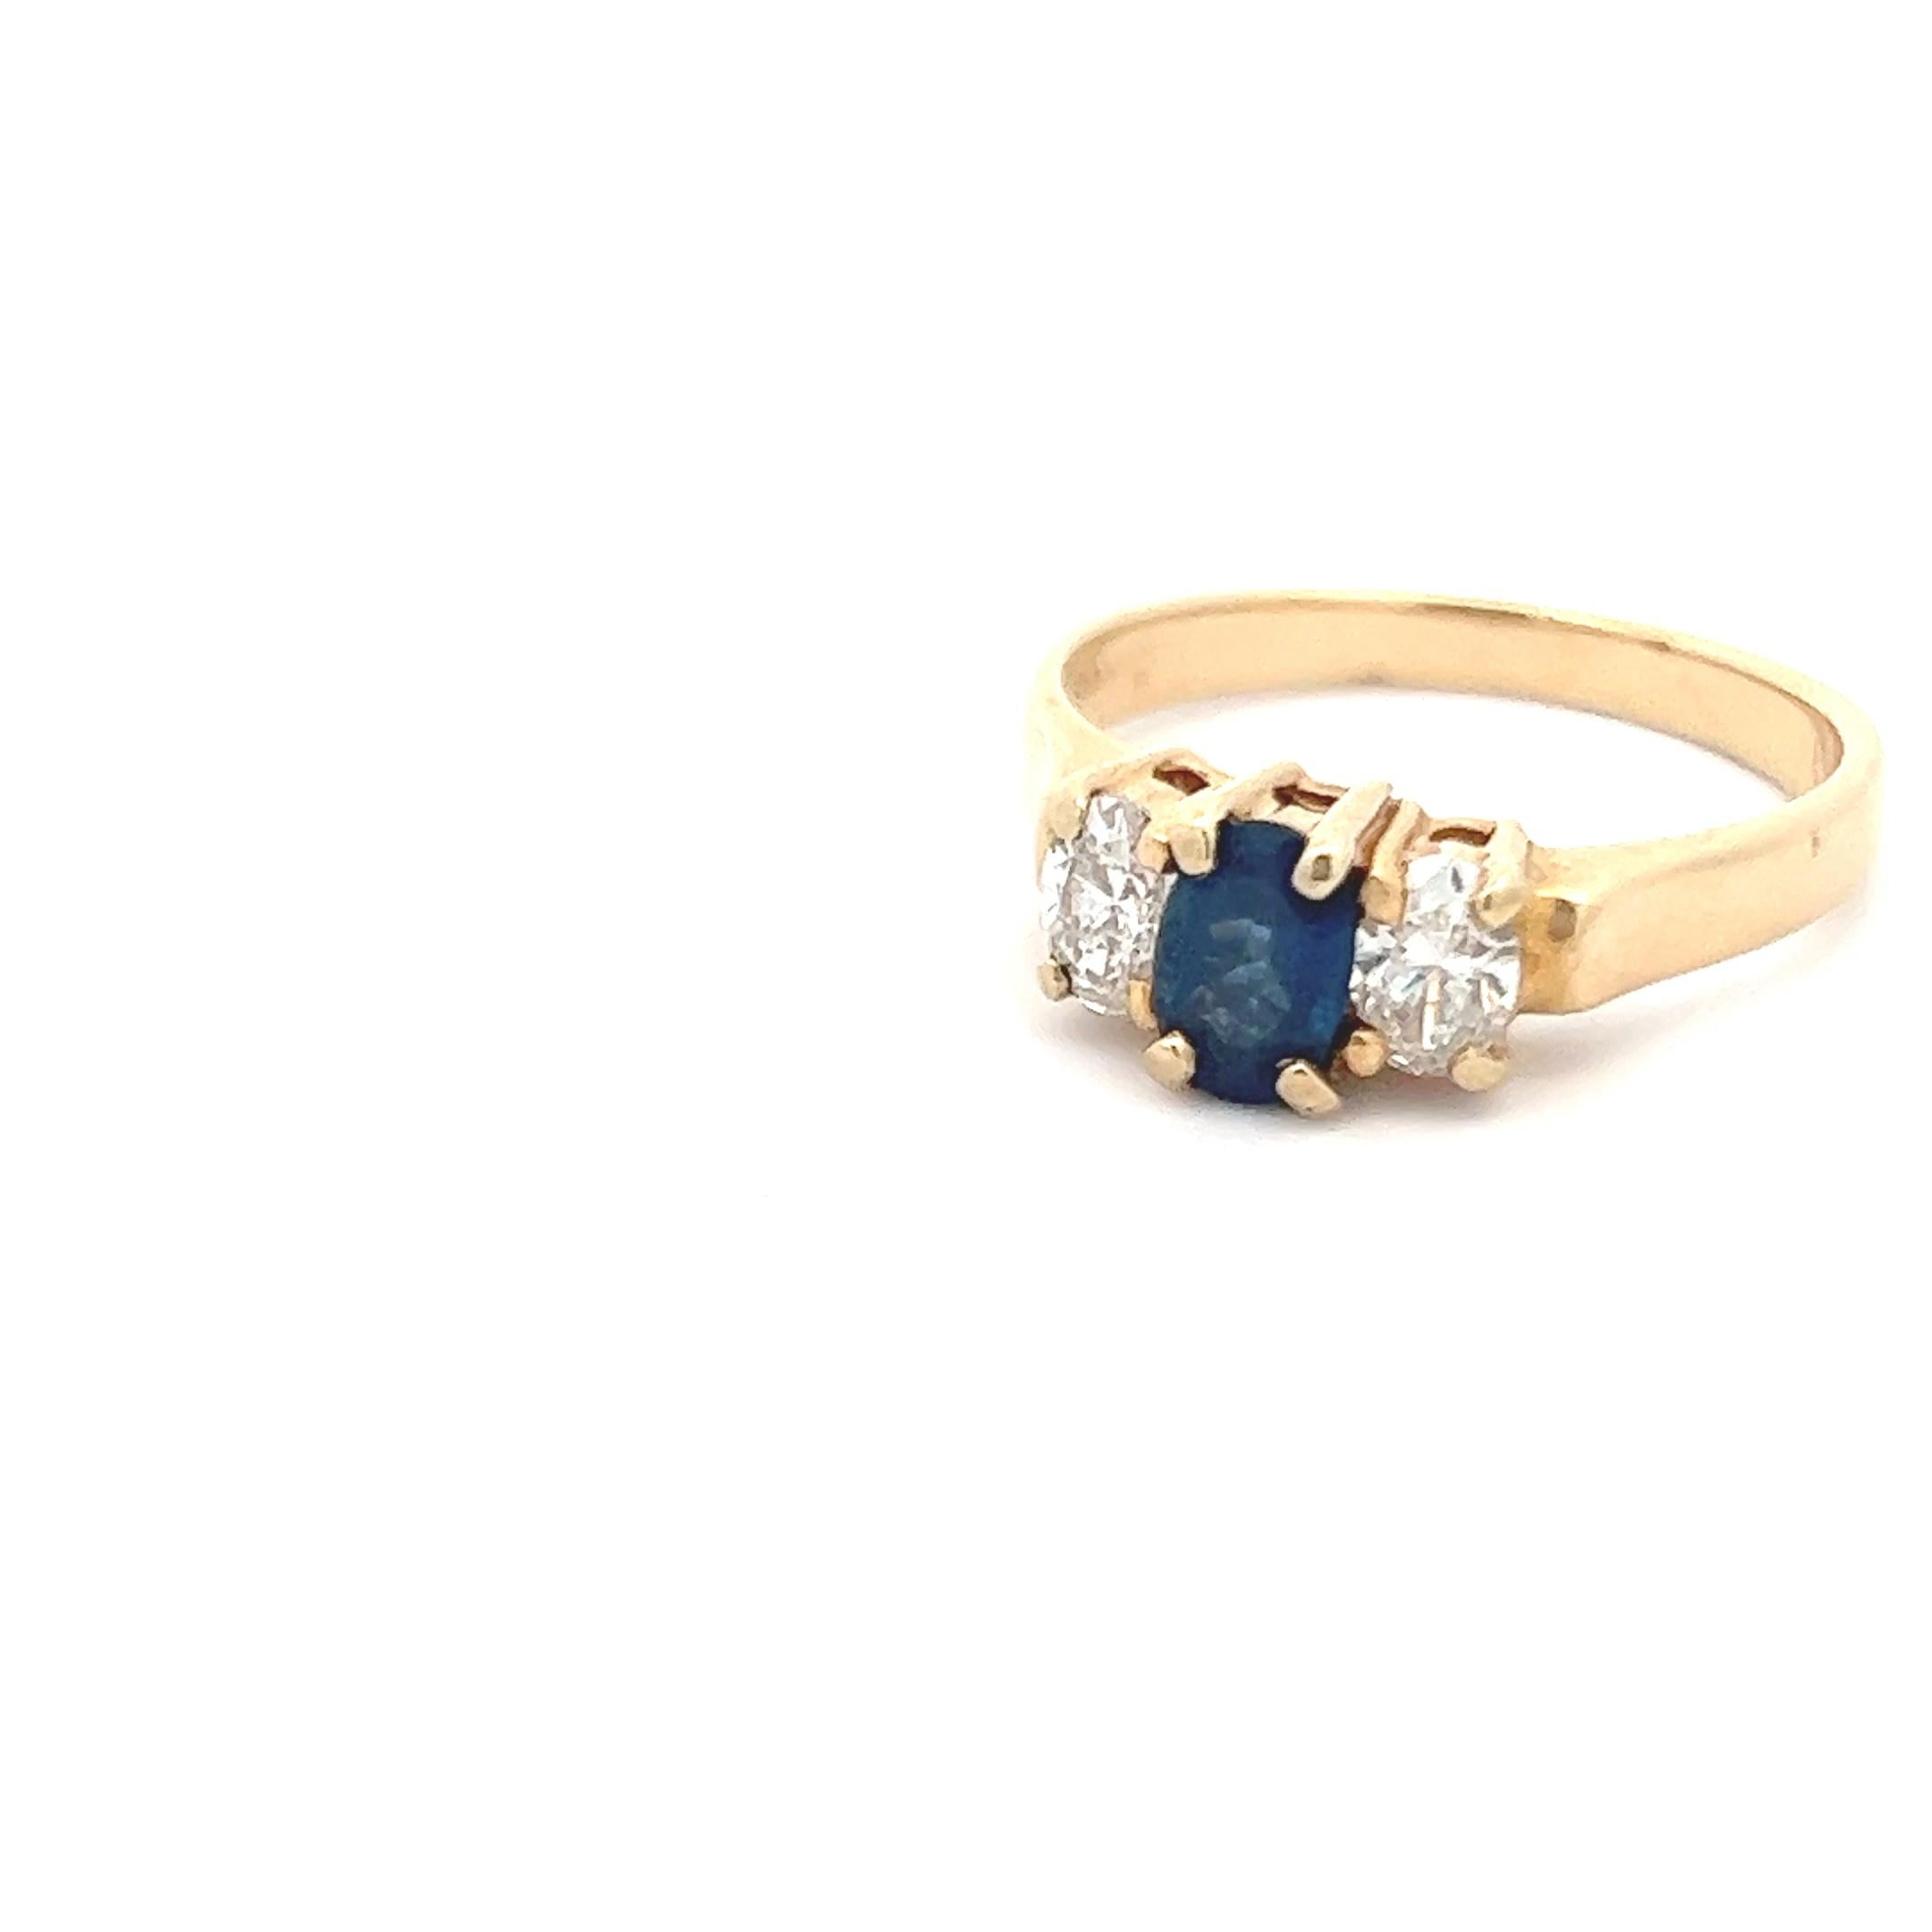 This 14k yellow gold contemporary ring is lovely, featuring both diamonds and sapphire. The ring showcases a 3 stone ring design with diamonds on the shoulders and a sapphire center stone. Though the design is traditional, the look is bold, as the